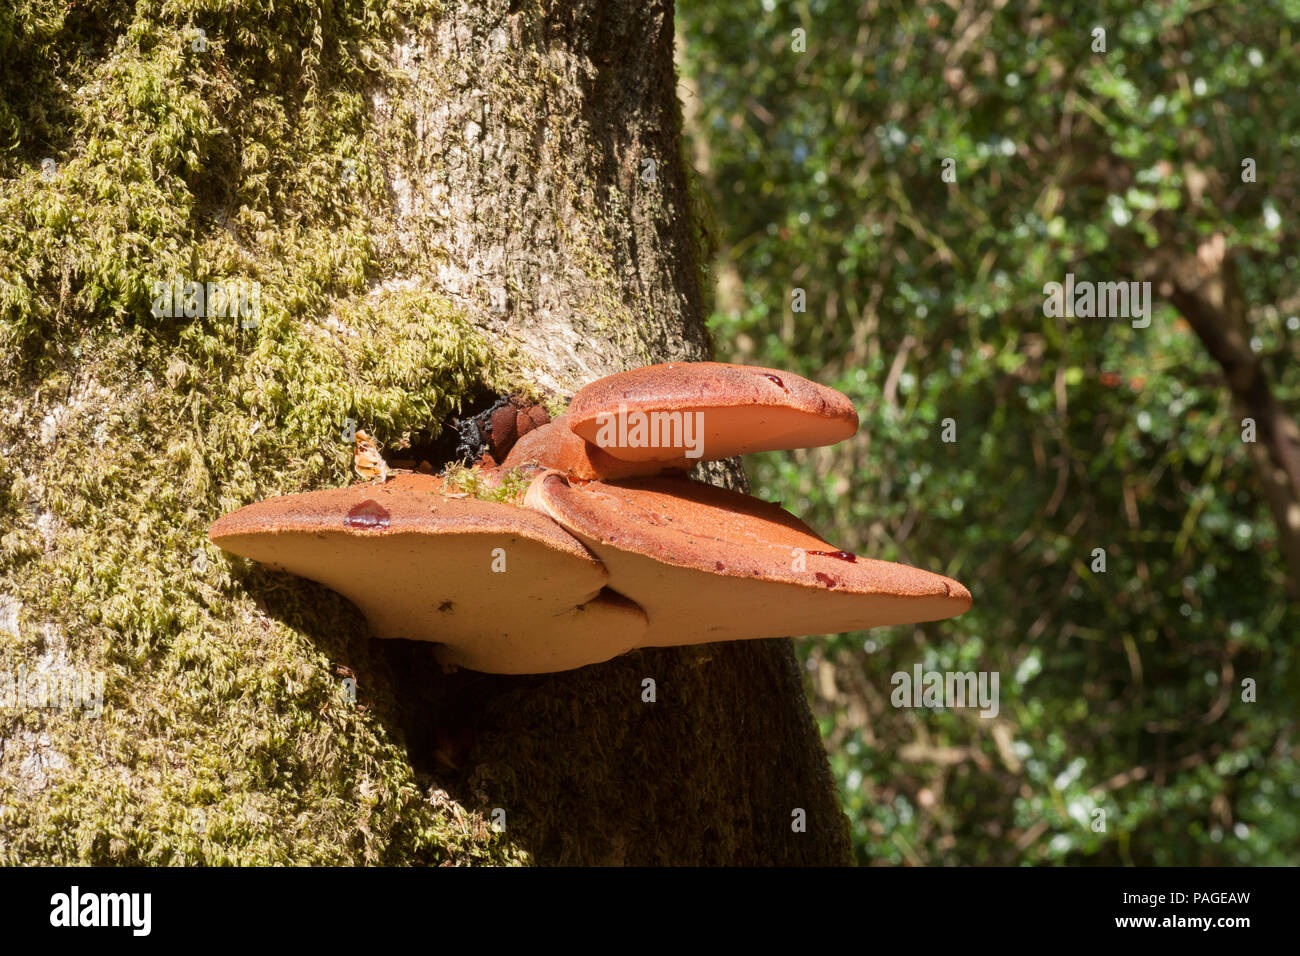 A beefsteak fungus, Fistulina hepatica, sometimes called a beefsteak polypore or ox tongue fungus growing on a living tree in the New Forest. The juic Stock Photo